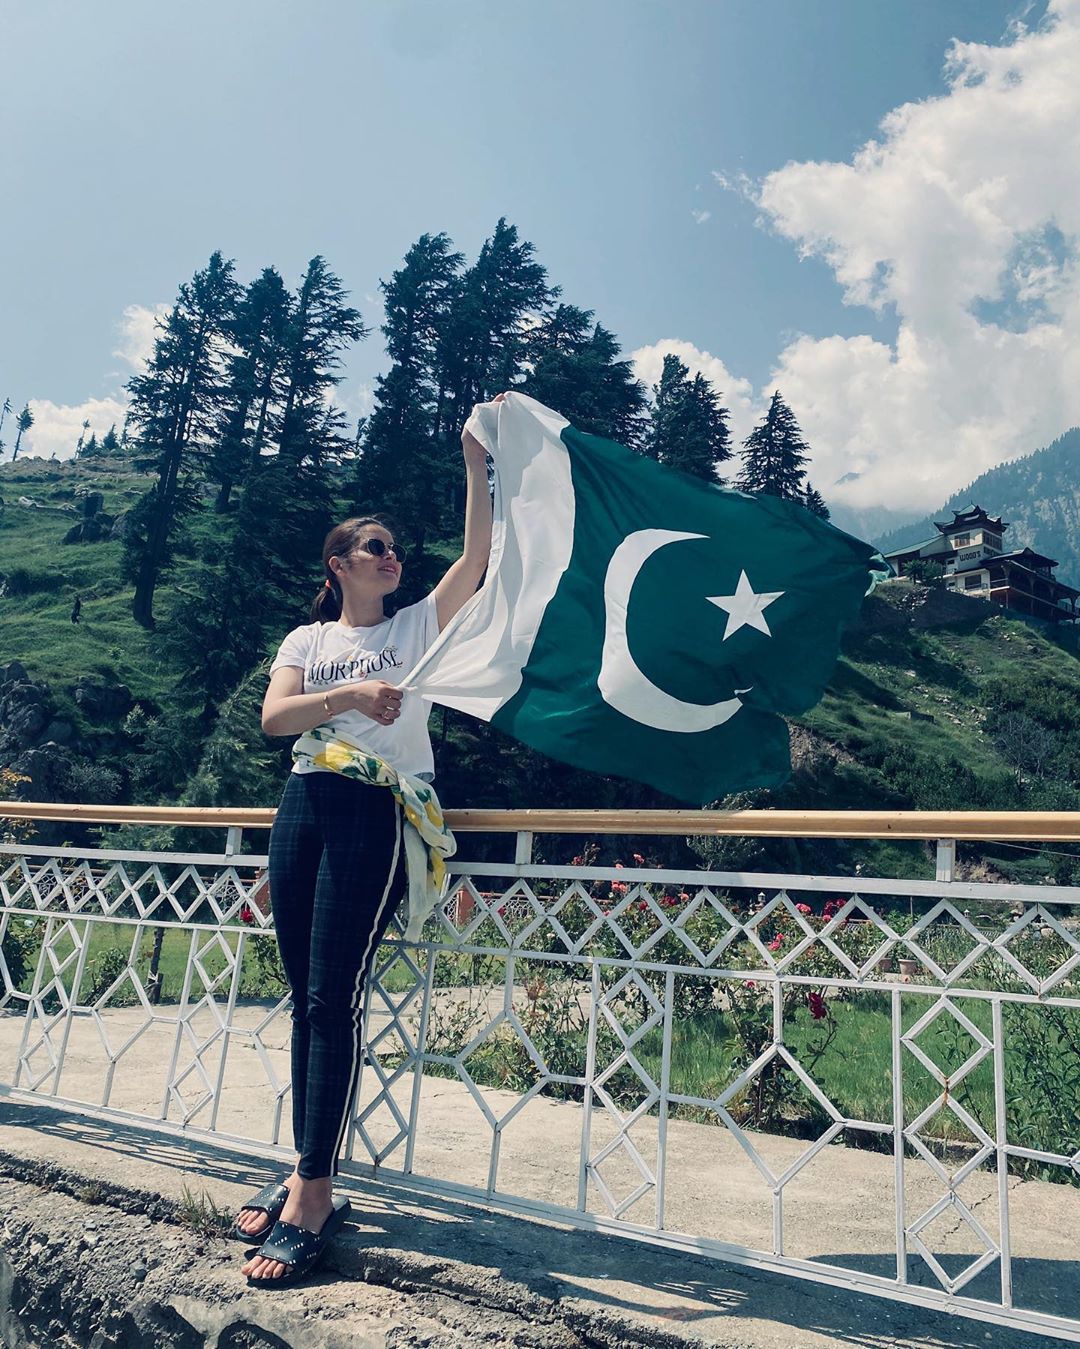 Aiman Khan and Minal Khan in Swat - Latest Pictures